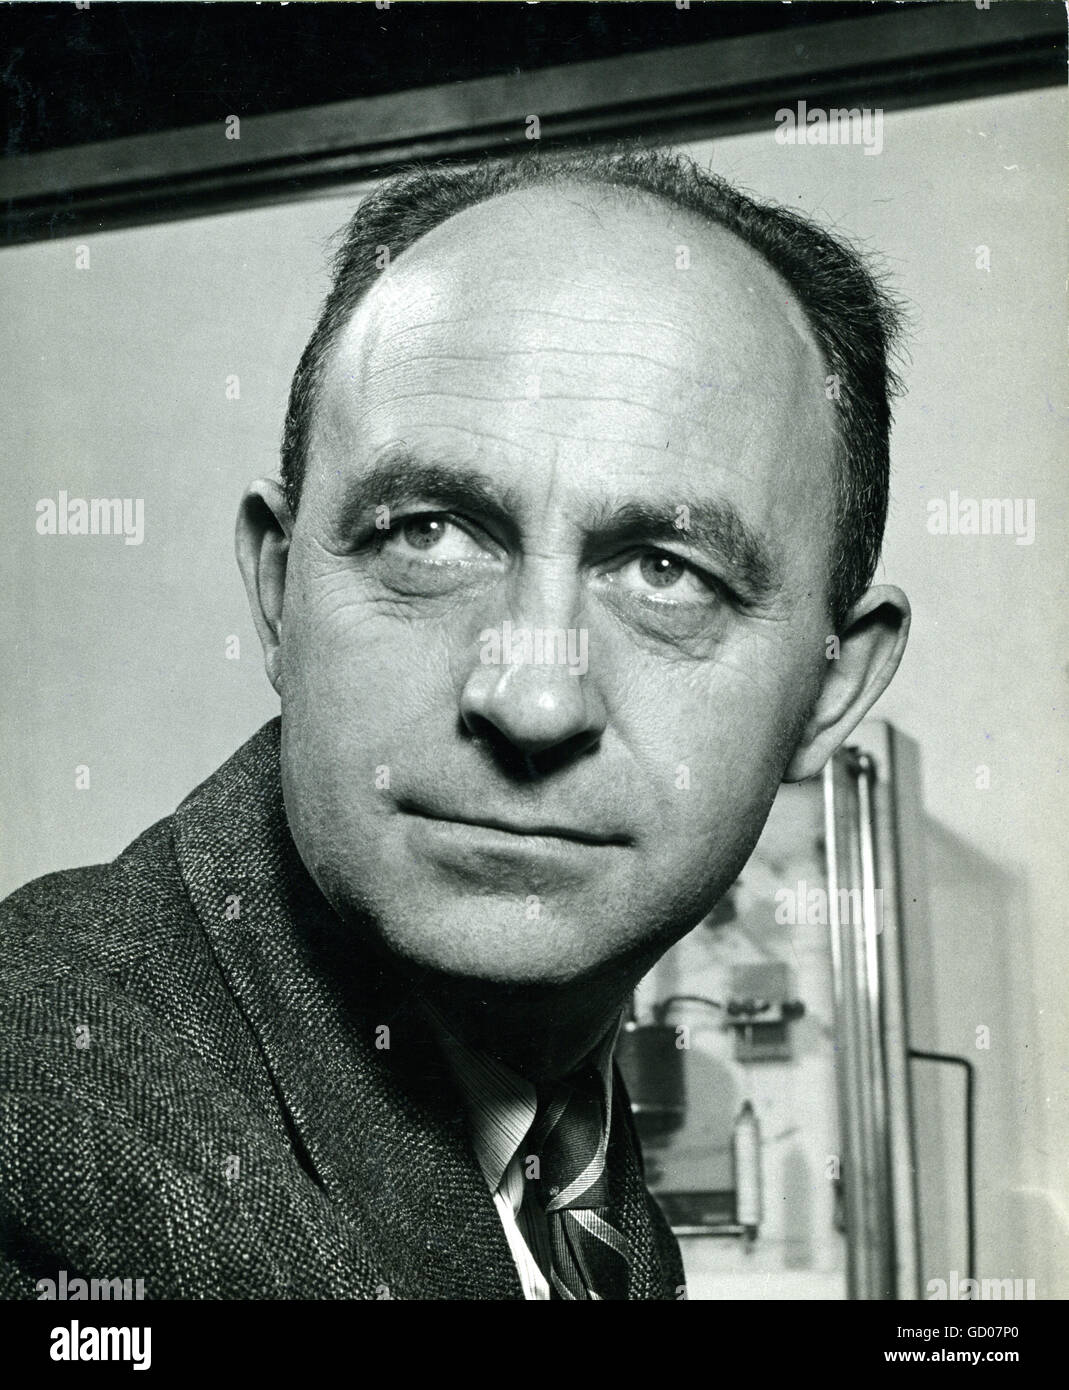 Enrico Fermi (1901-1954), Italian physicist, winner of a Nobel Prize in 1938 and exiled by Mussolini in 1939. He became a US citizen and worked on developing the atom bomb. Stock Photo